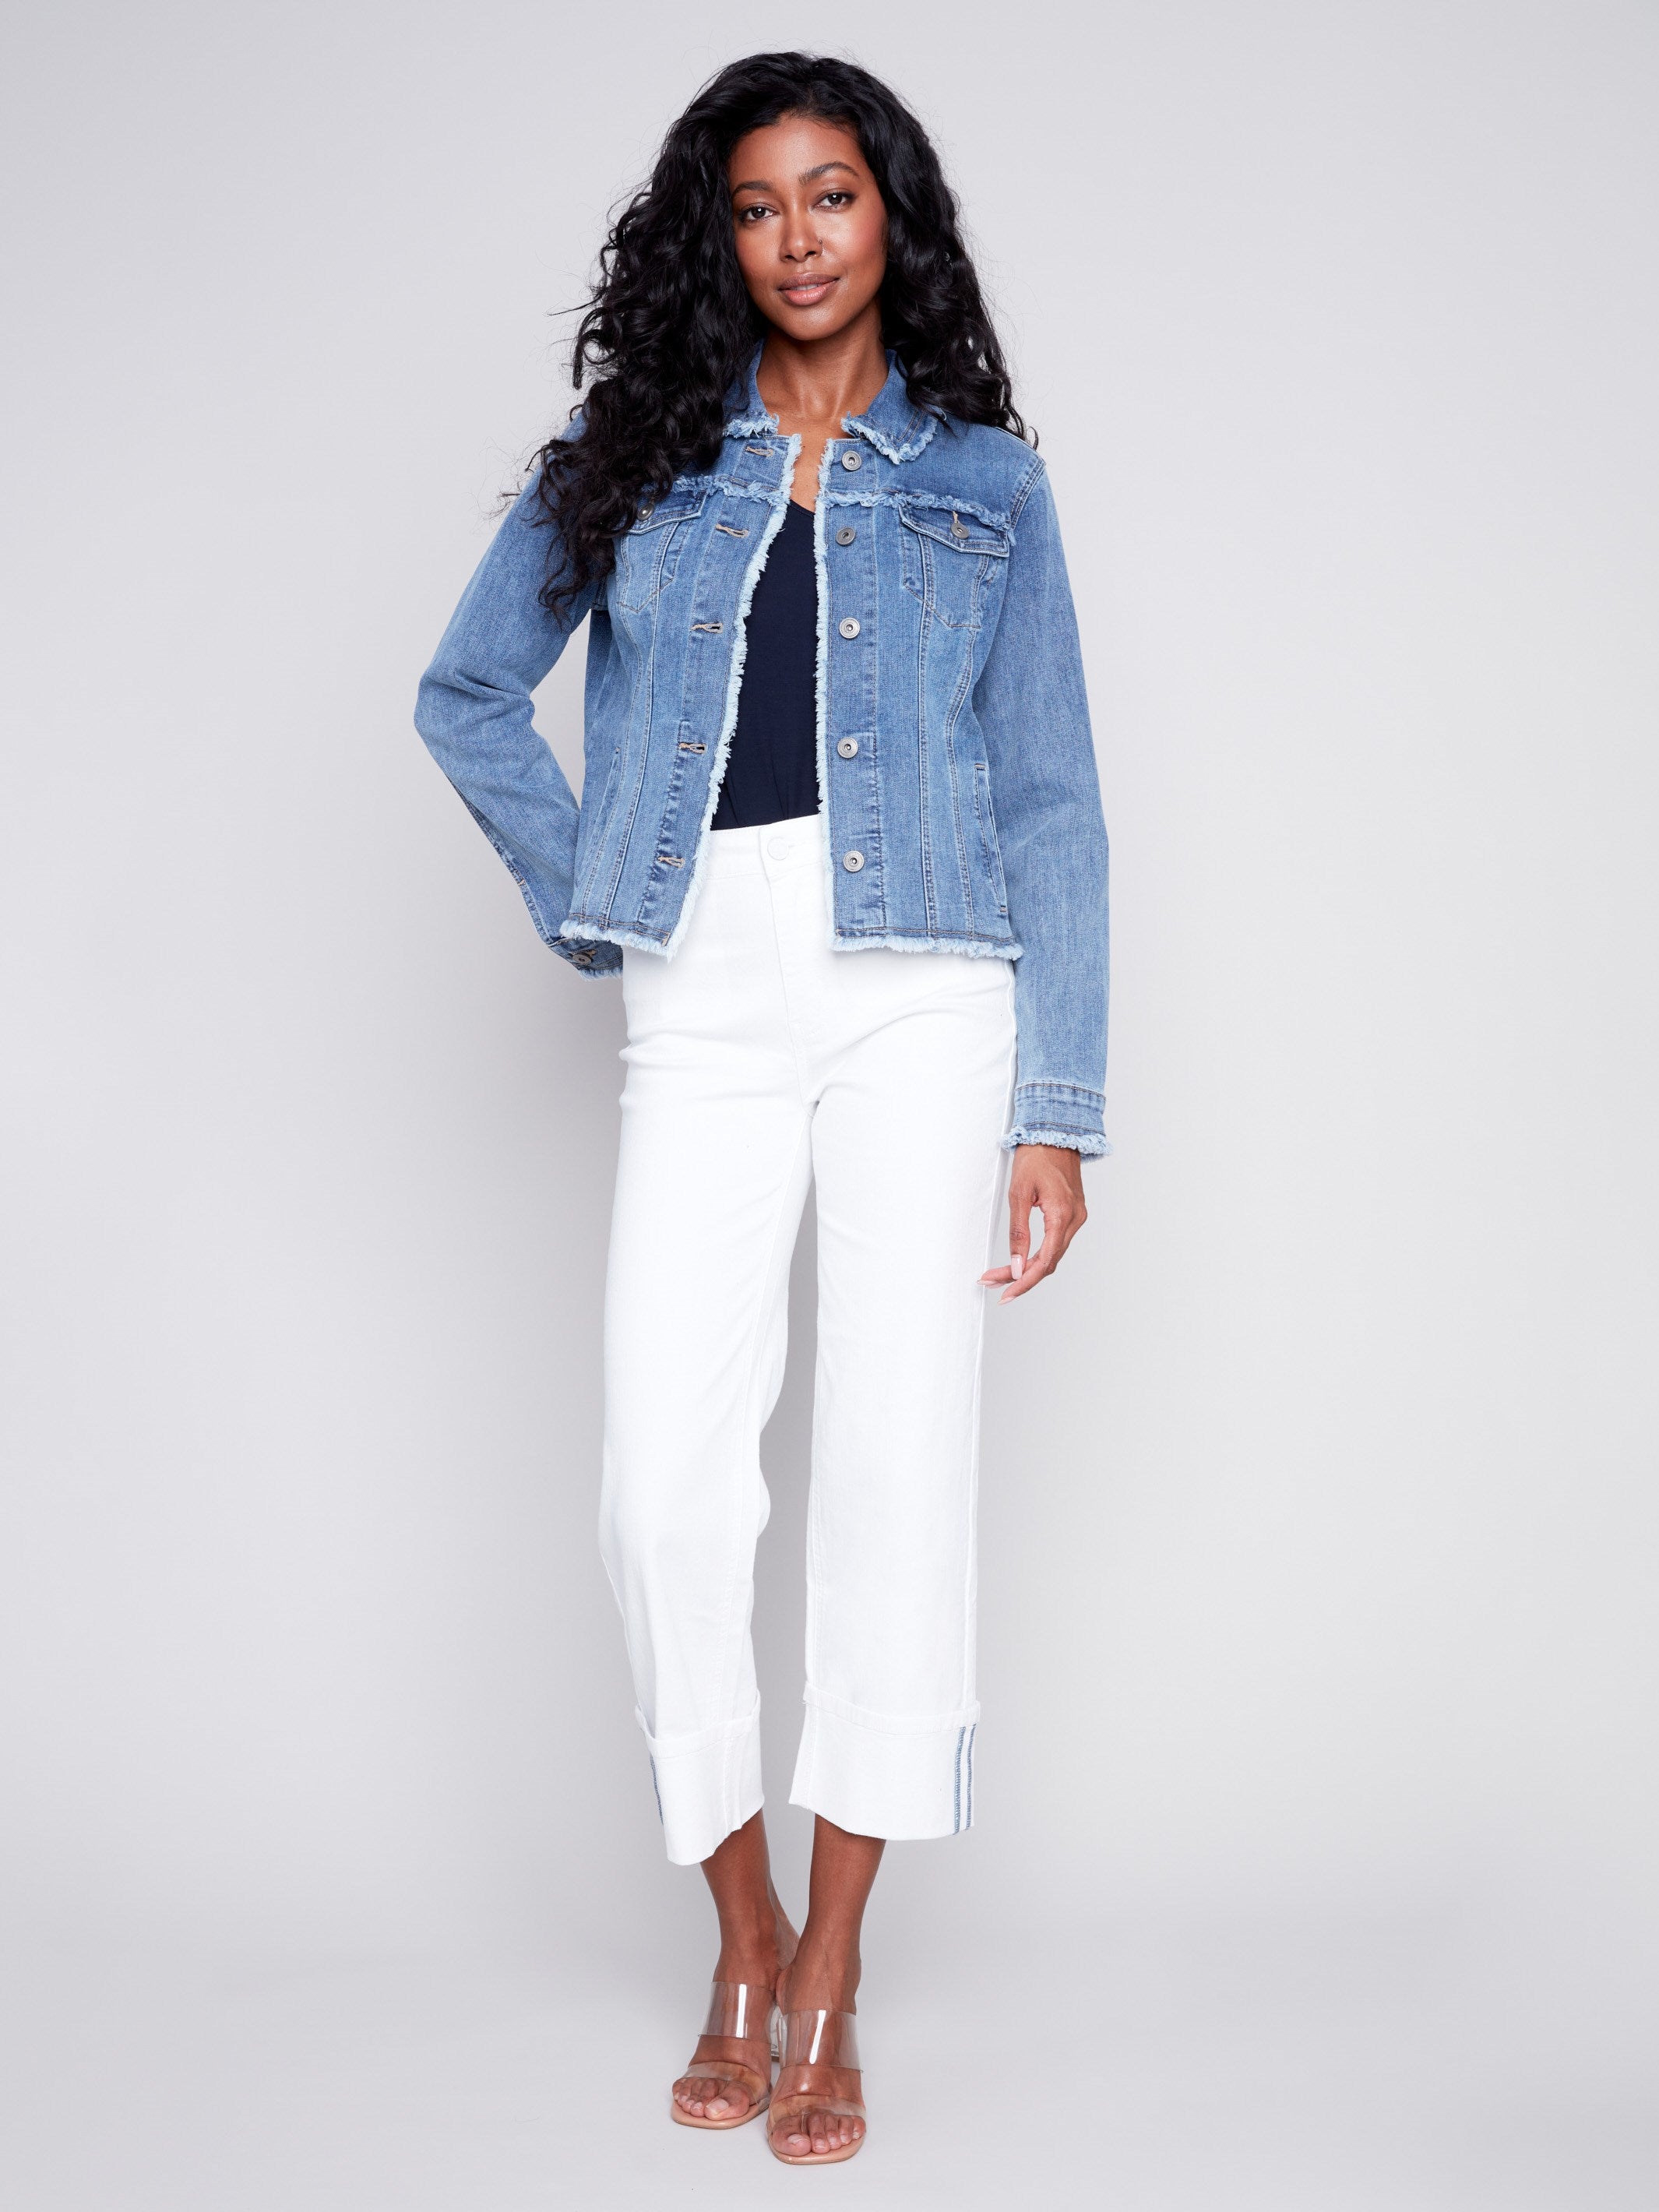 Jean Jacket with Frayed Edges - Medium Blue - Charlie B Collection Canada - Image 3